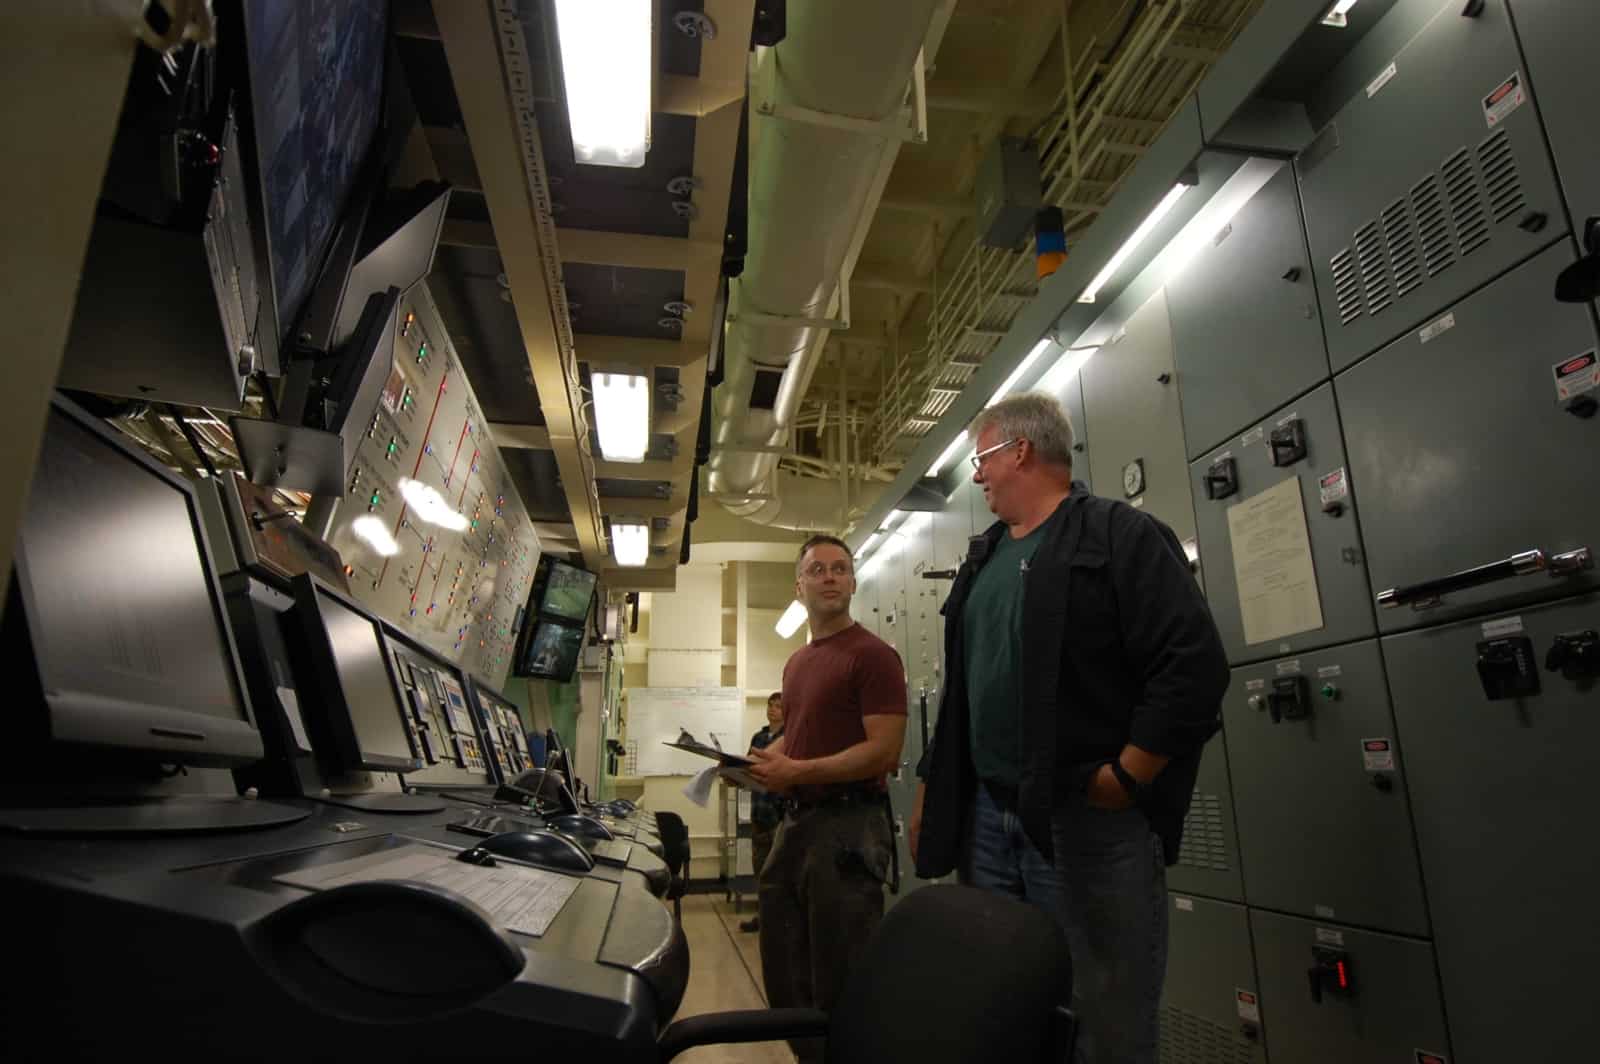 Hary Poole stands in a ship's engine room talking to a worker